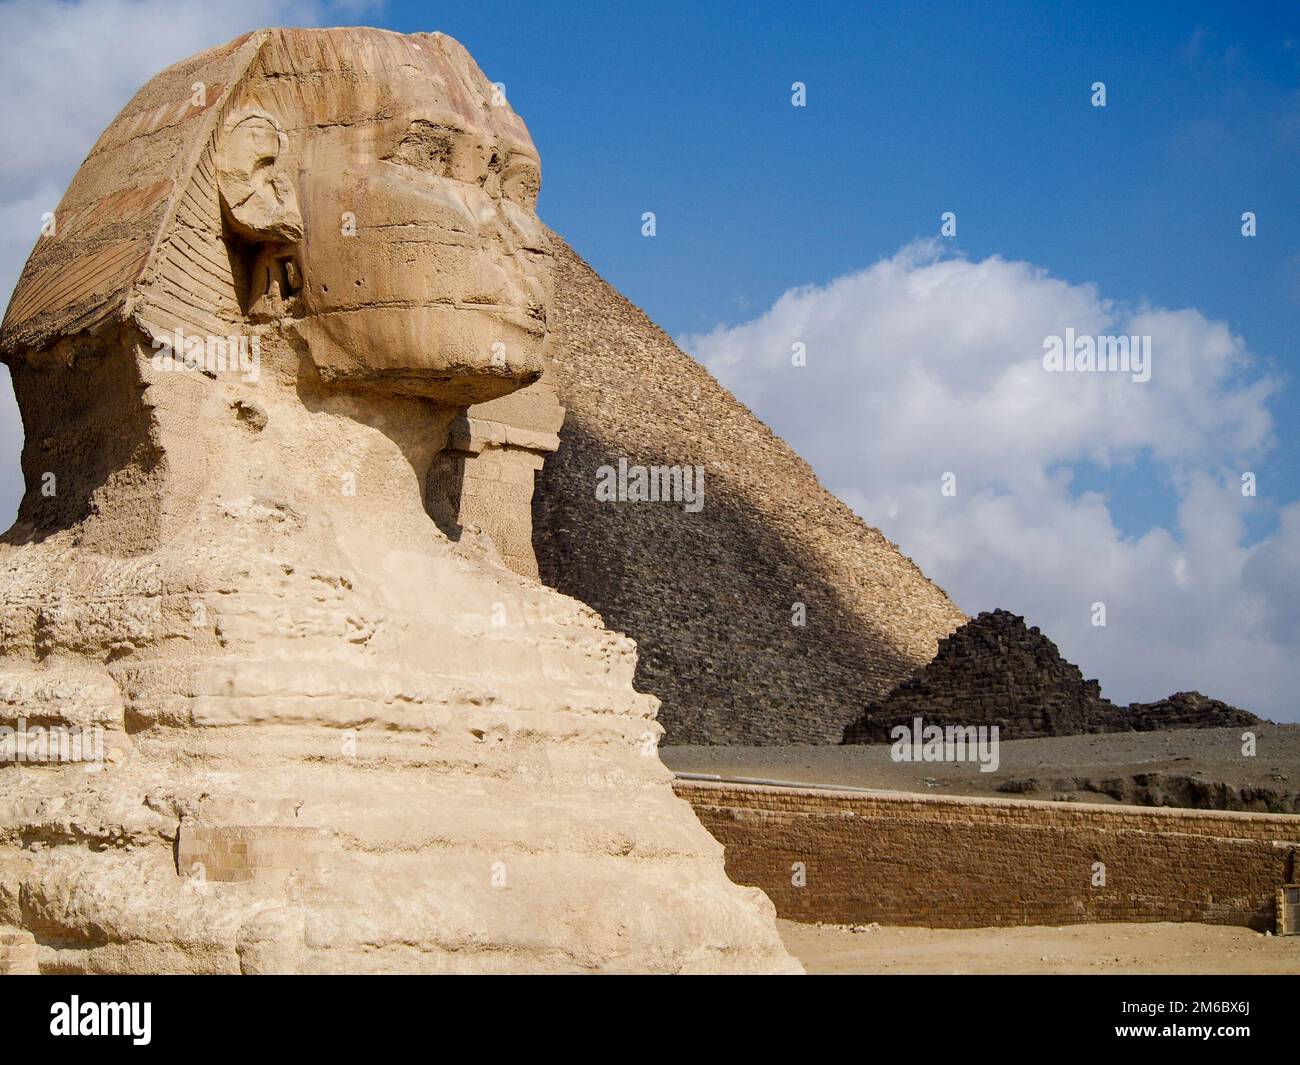 Ancient Sphinx Monument at Pyramids of Giza Stock Photo